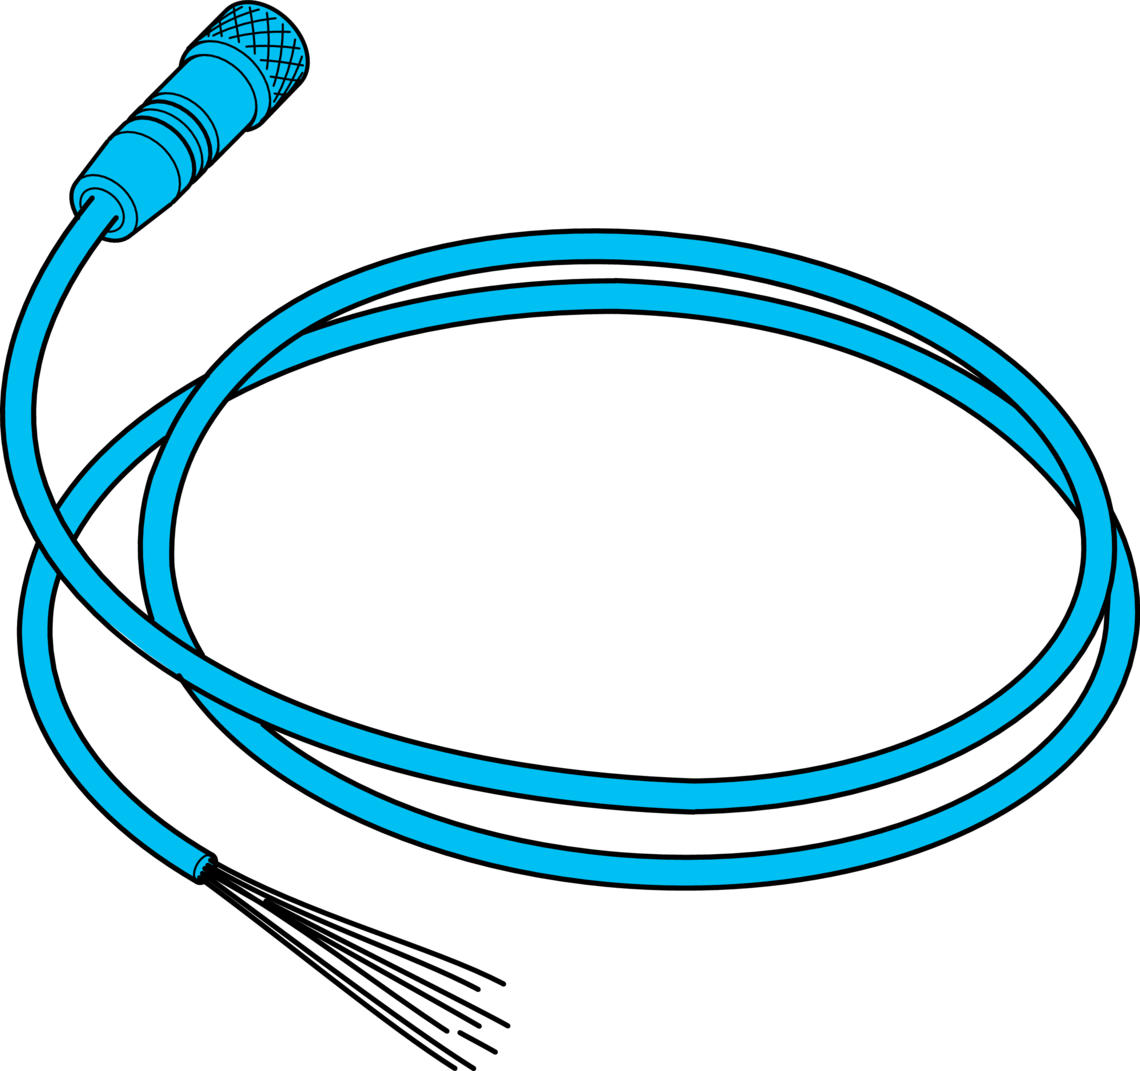 Z-AT-ALE Connection cables